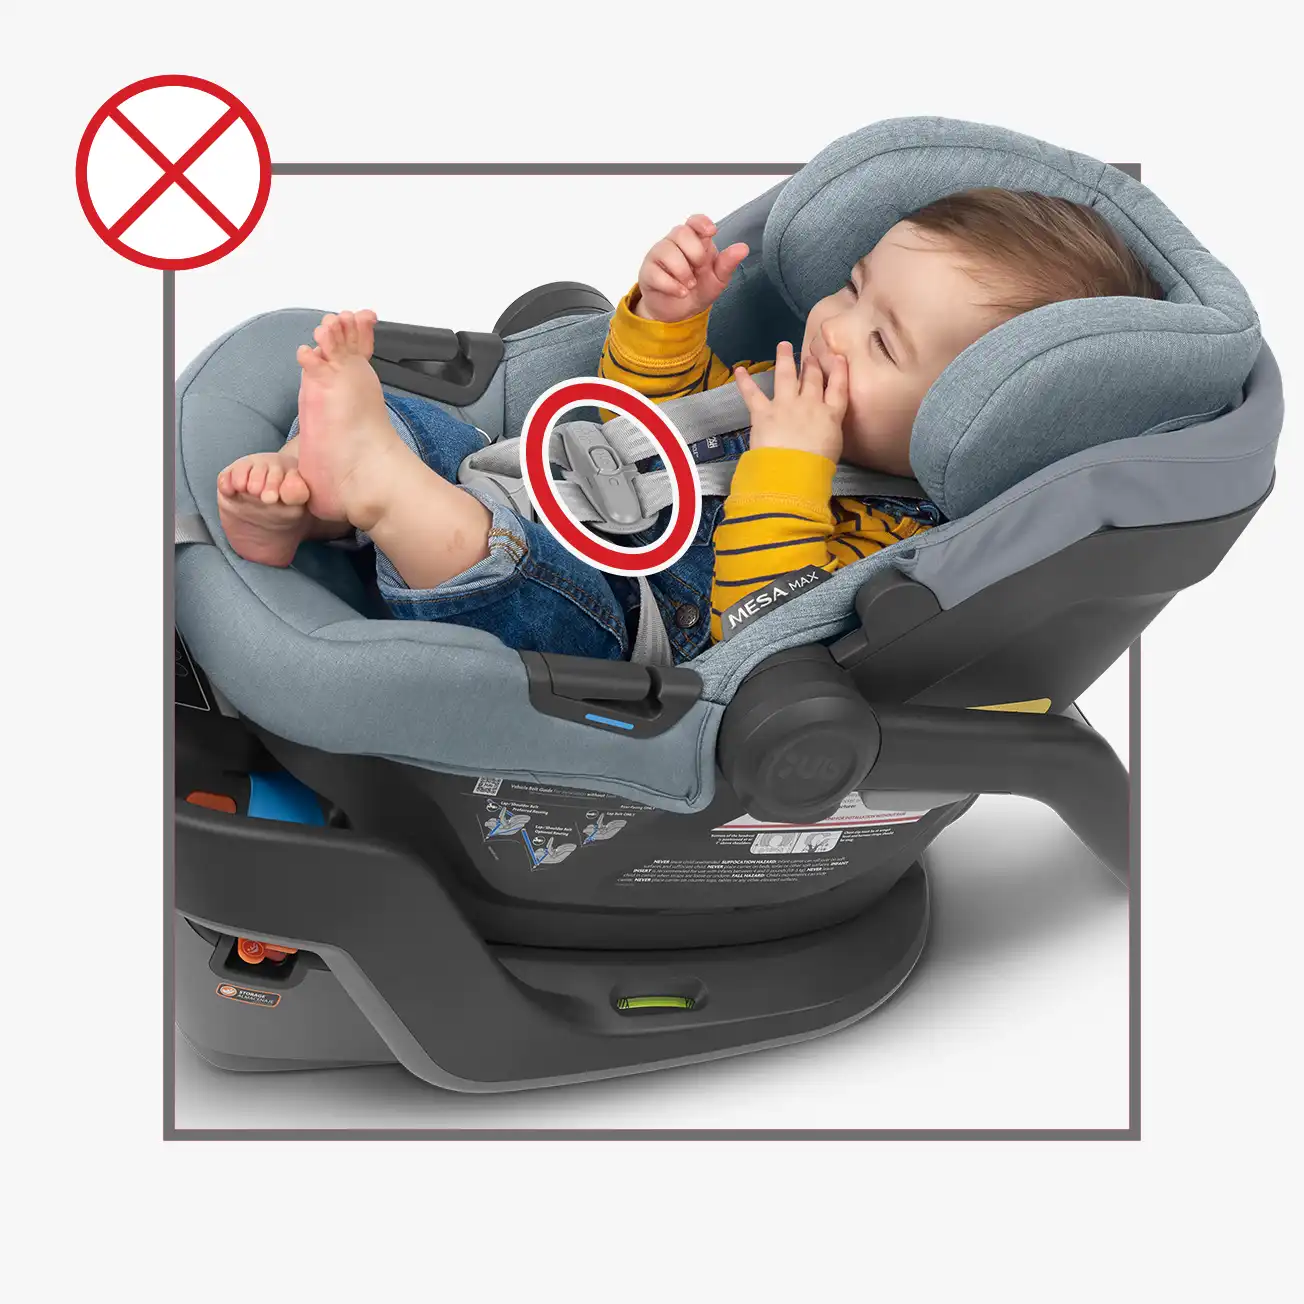 UPPAbaby Car Seats: The Right Fit for Every Phase - UPPAbaby